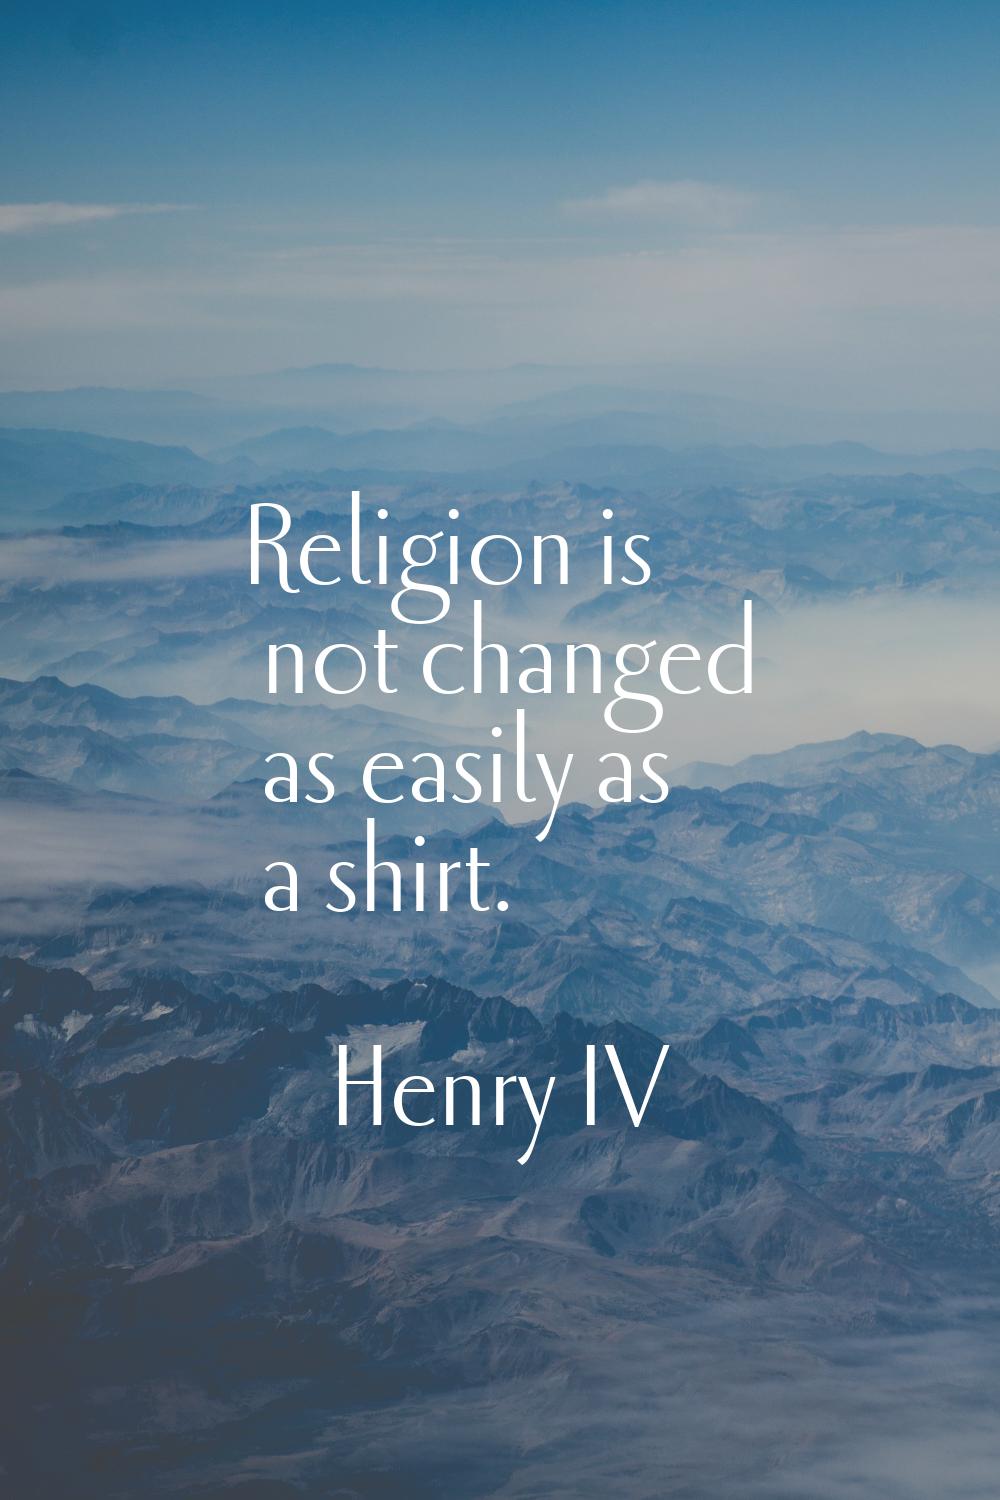 Religion is not changed as easily as a shirt.